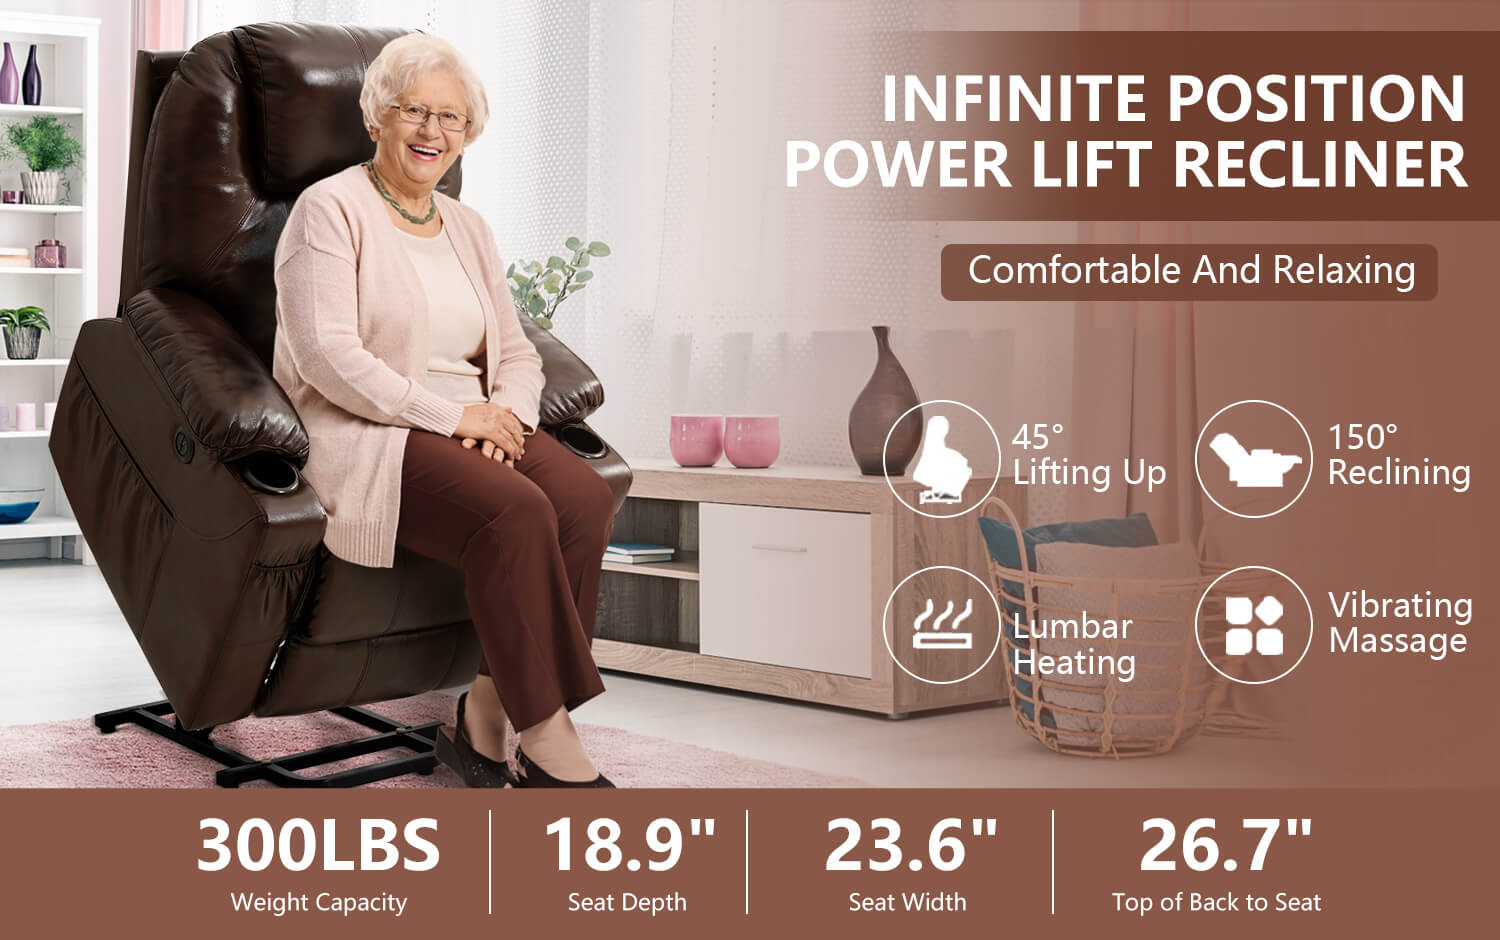 Soulout lift recliner chair helps the elderly stand up